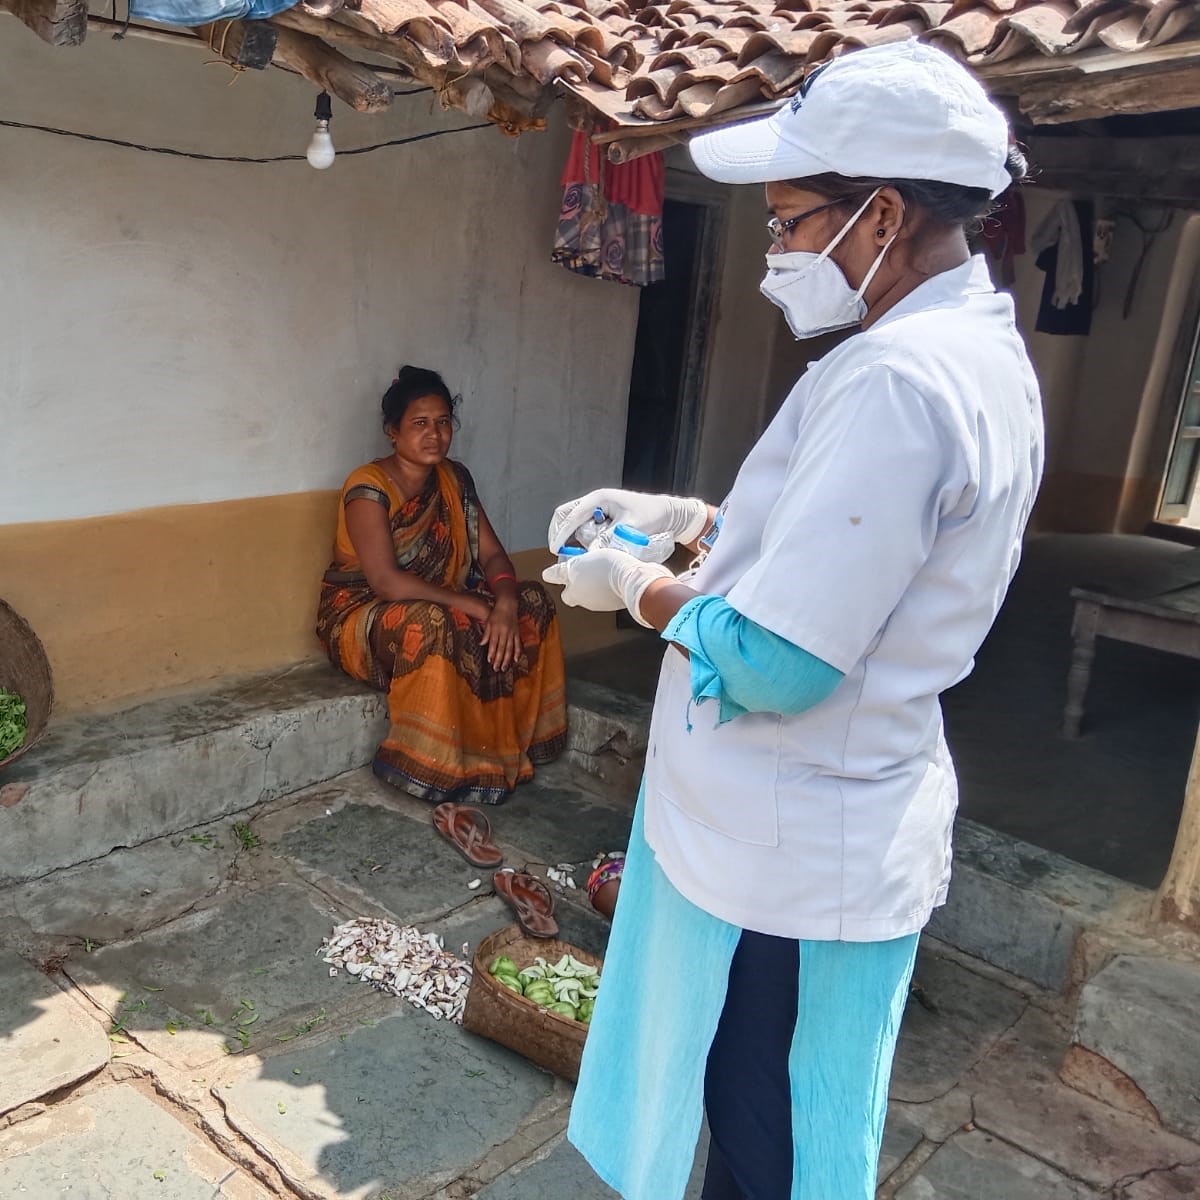 Healing India: women of the public health system